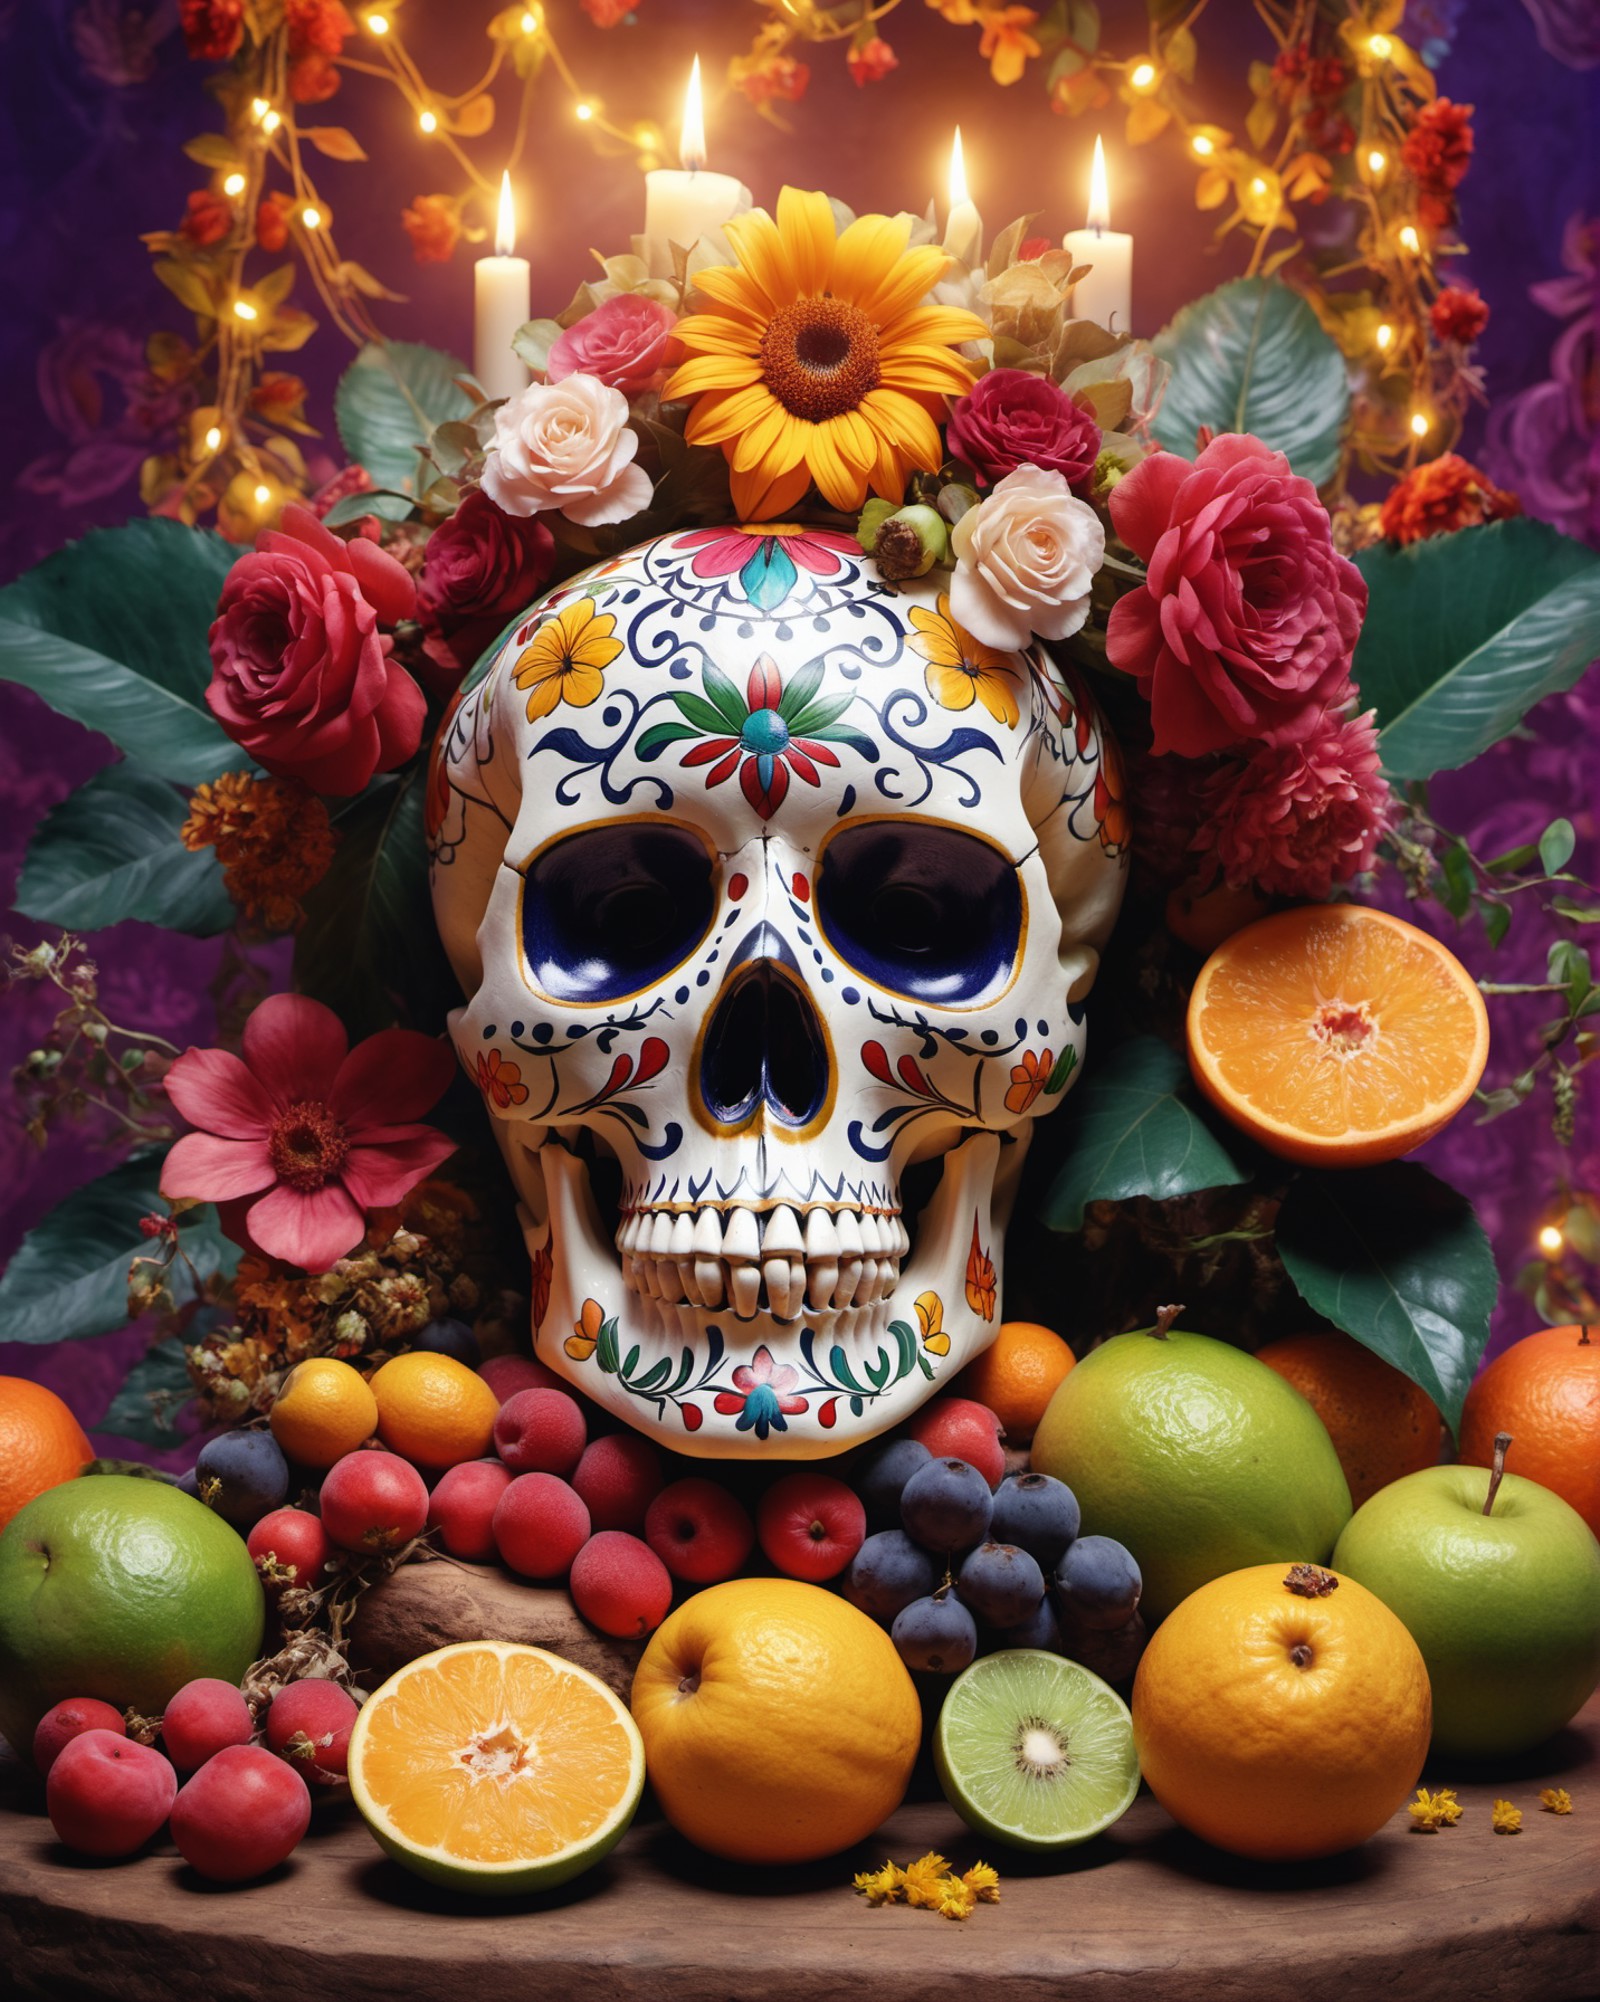 stunning still-life photo render of a Mexican Skull Calavera, surrounded by poetic ornamental elements such as fruits, flo...